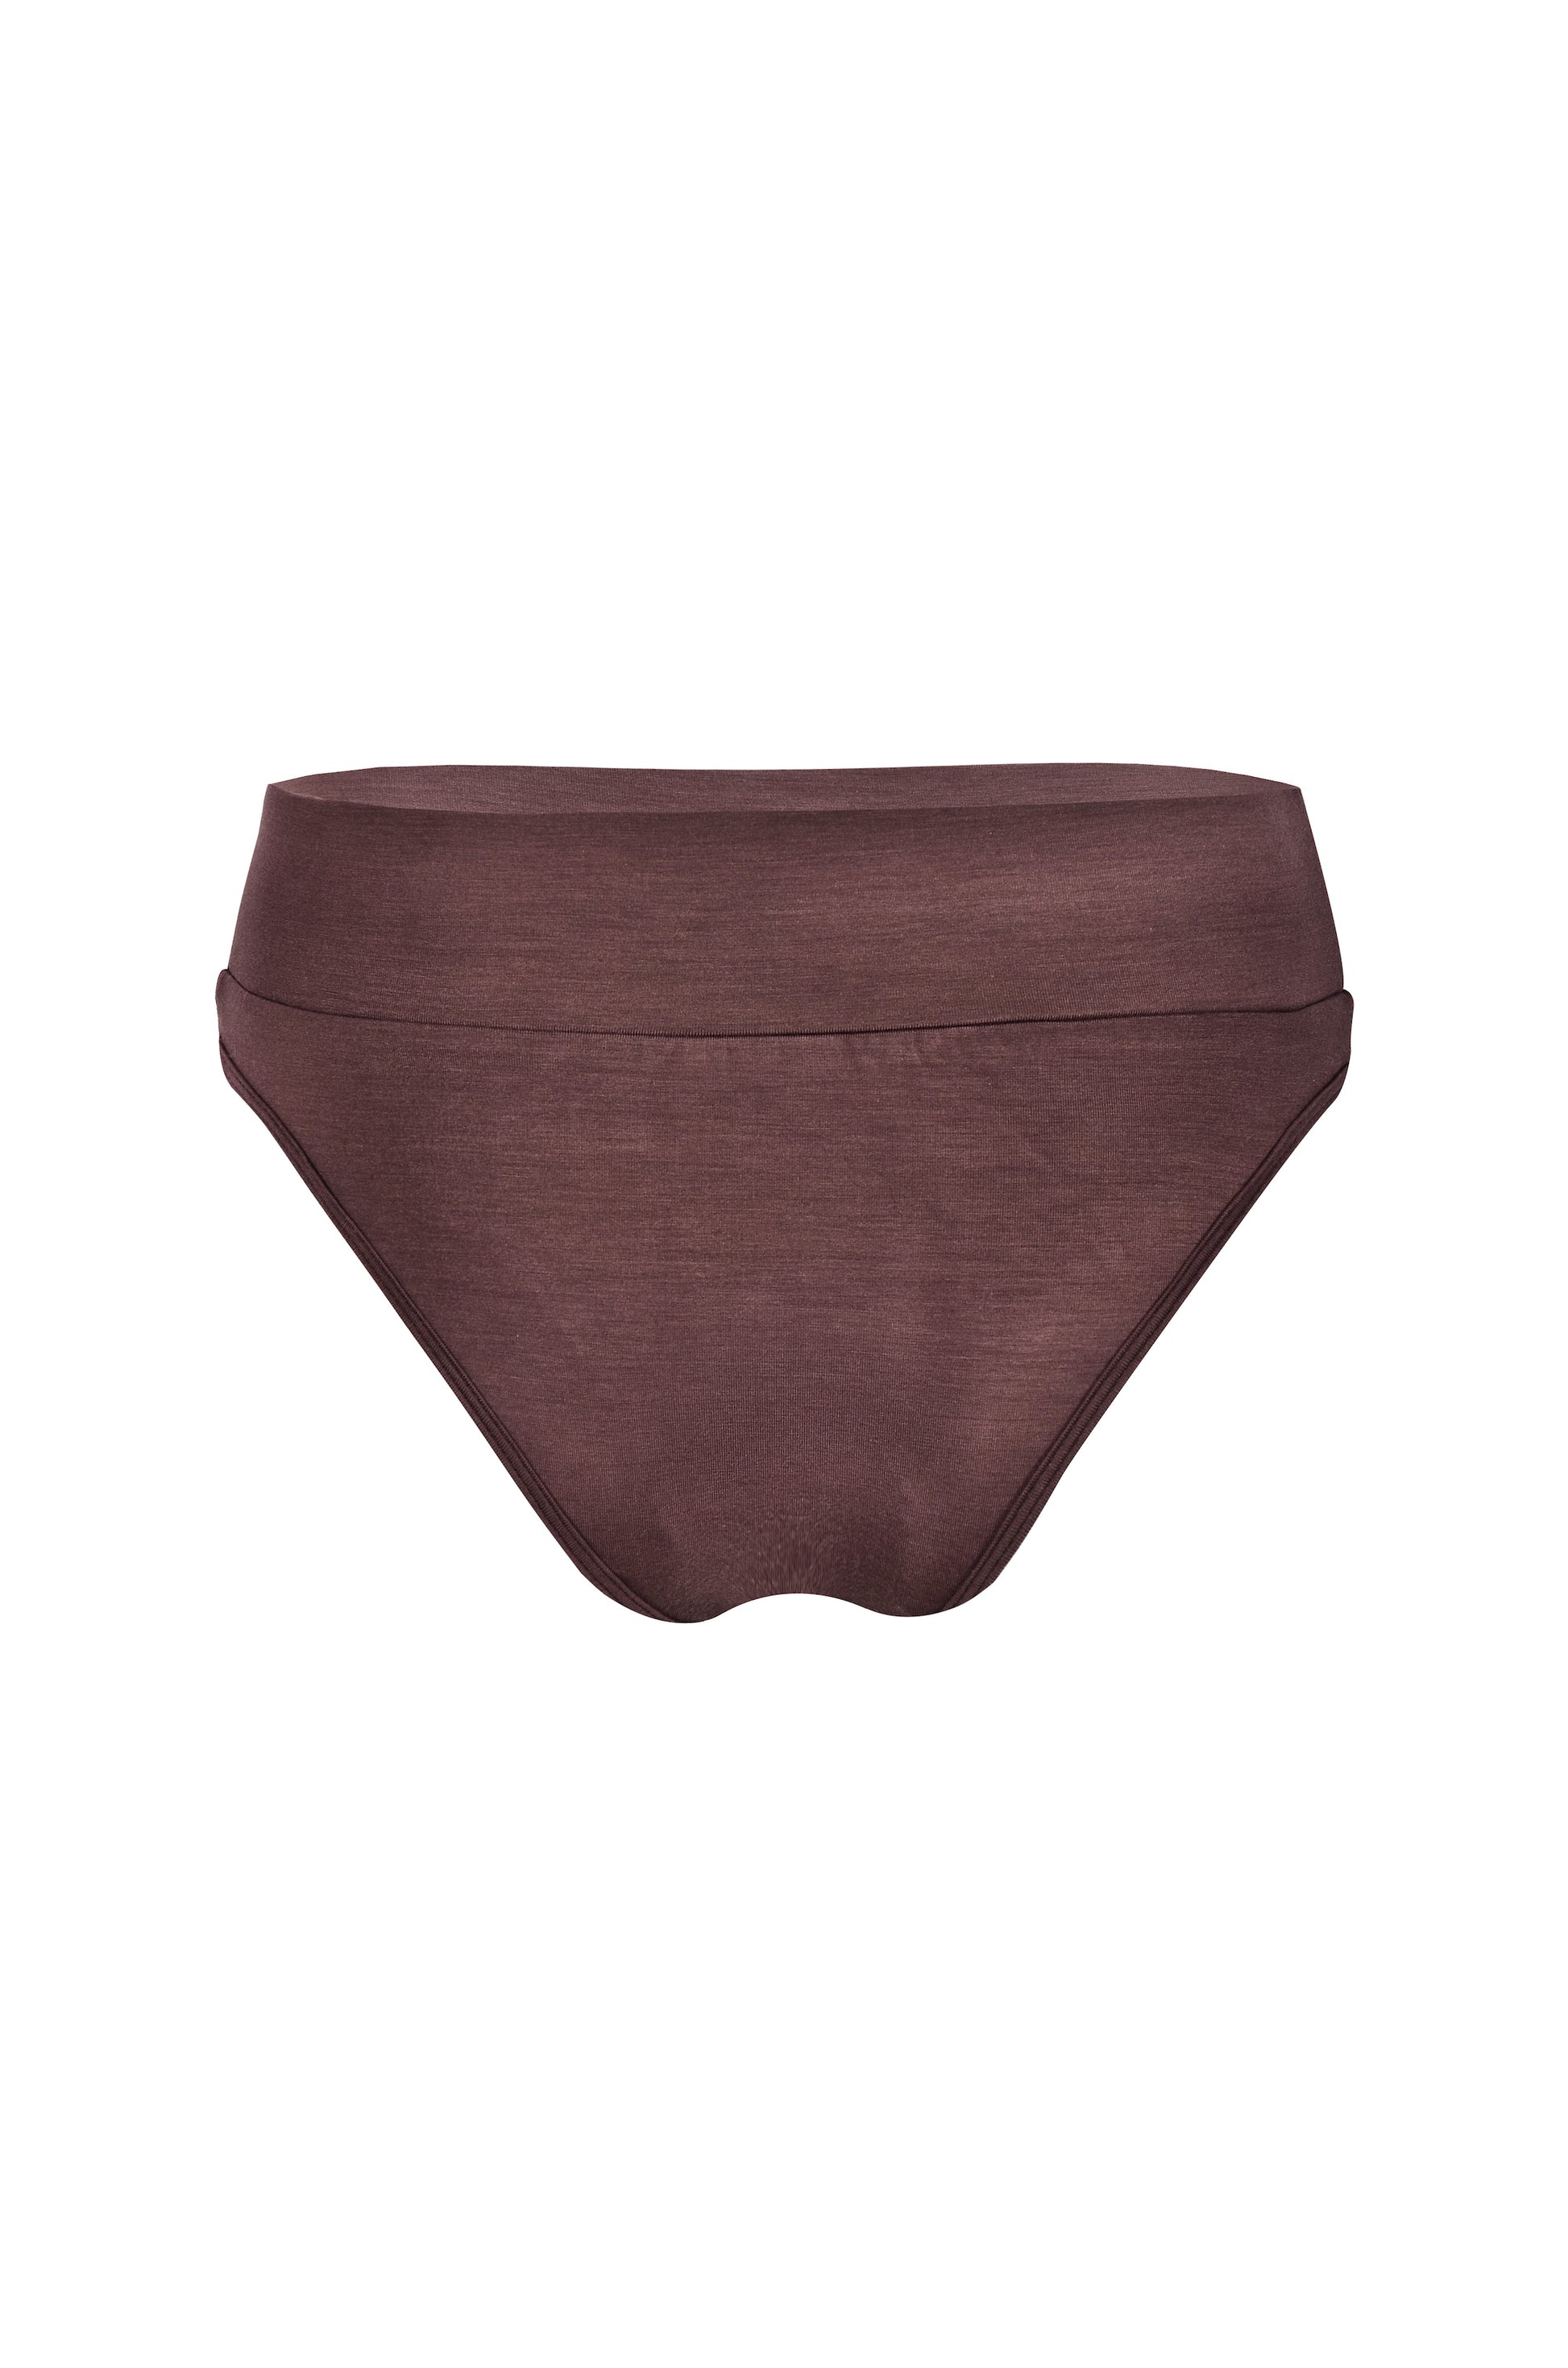 Serenity Panty Chocolate - INTIMATES THIS IS A LOVE SONG